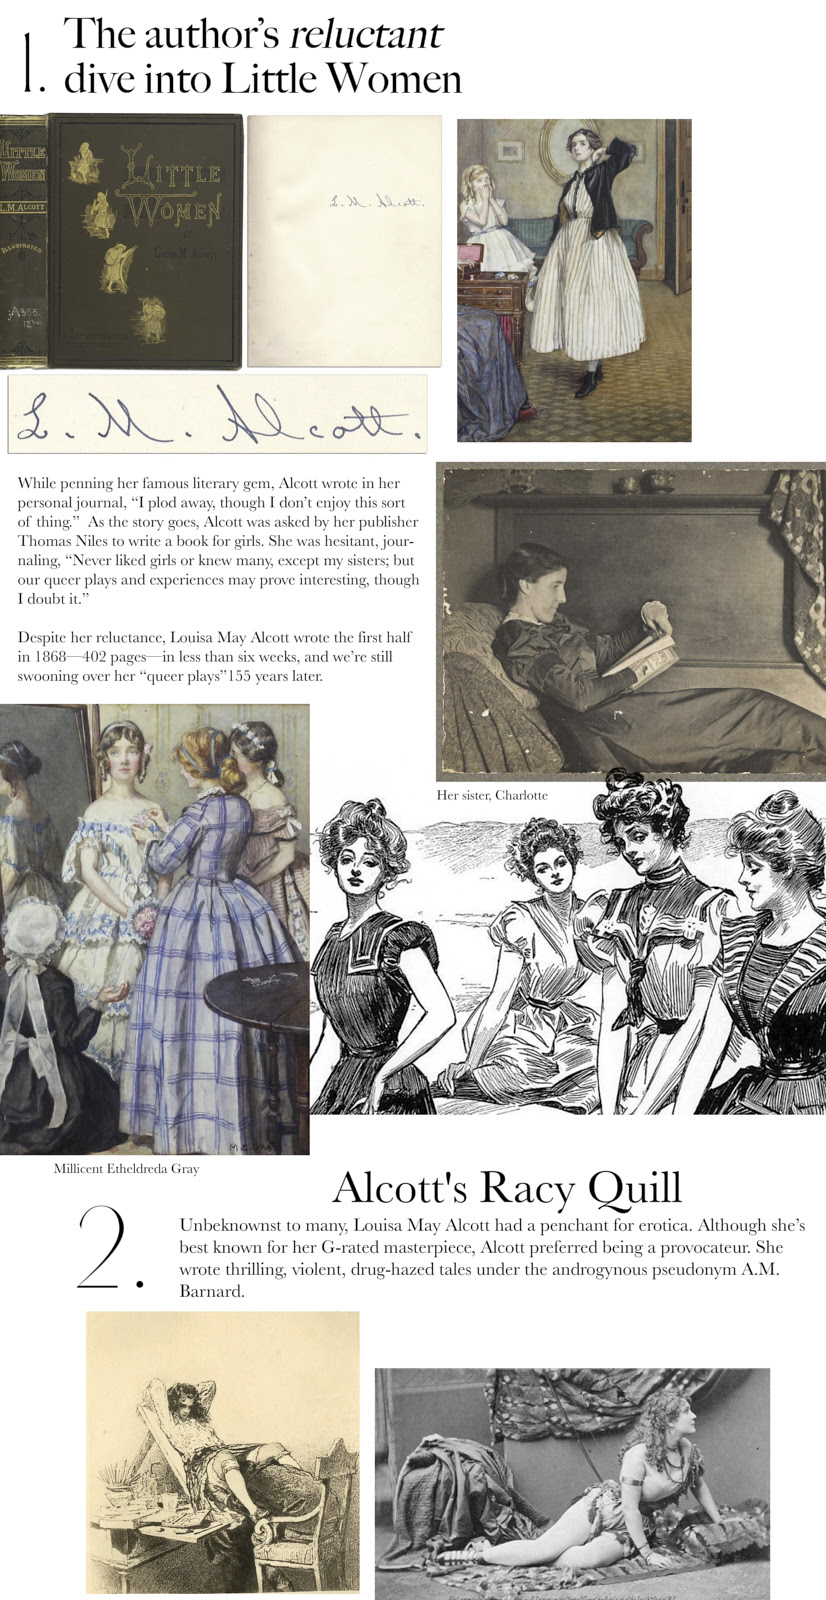 1. The author's reluctant dive into Little Women. 2. Alcott's Racy Quill